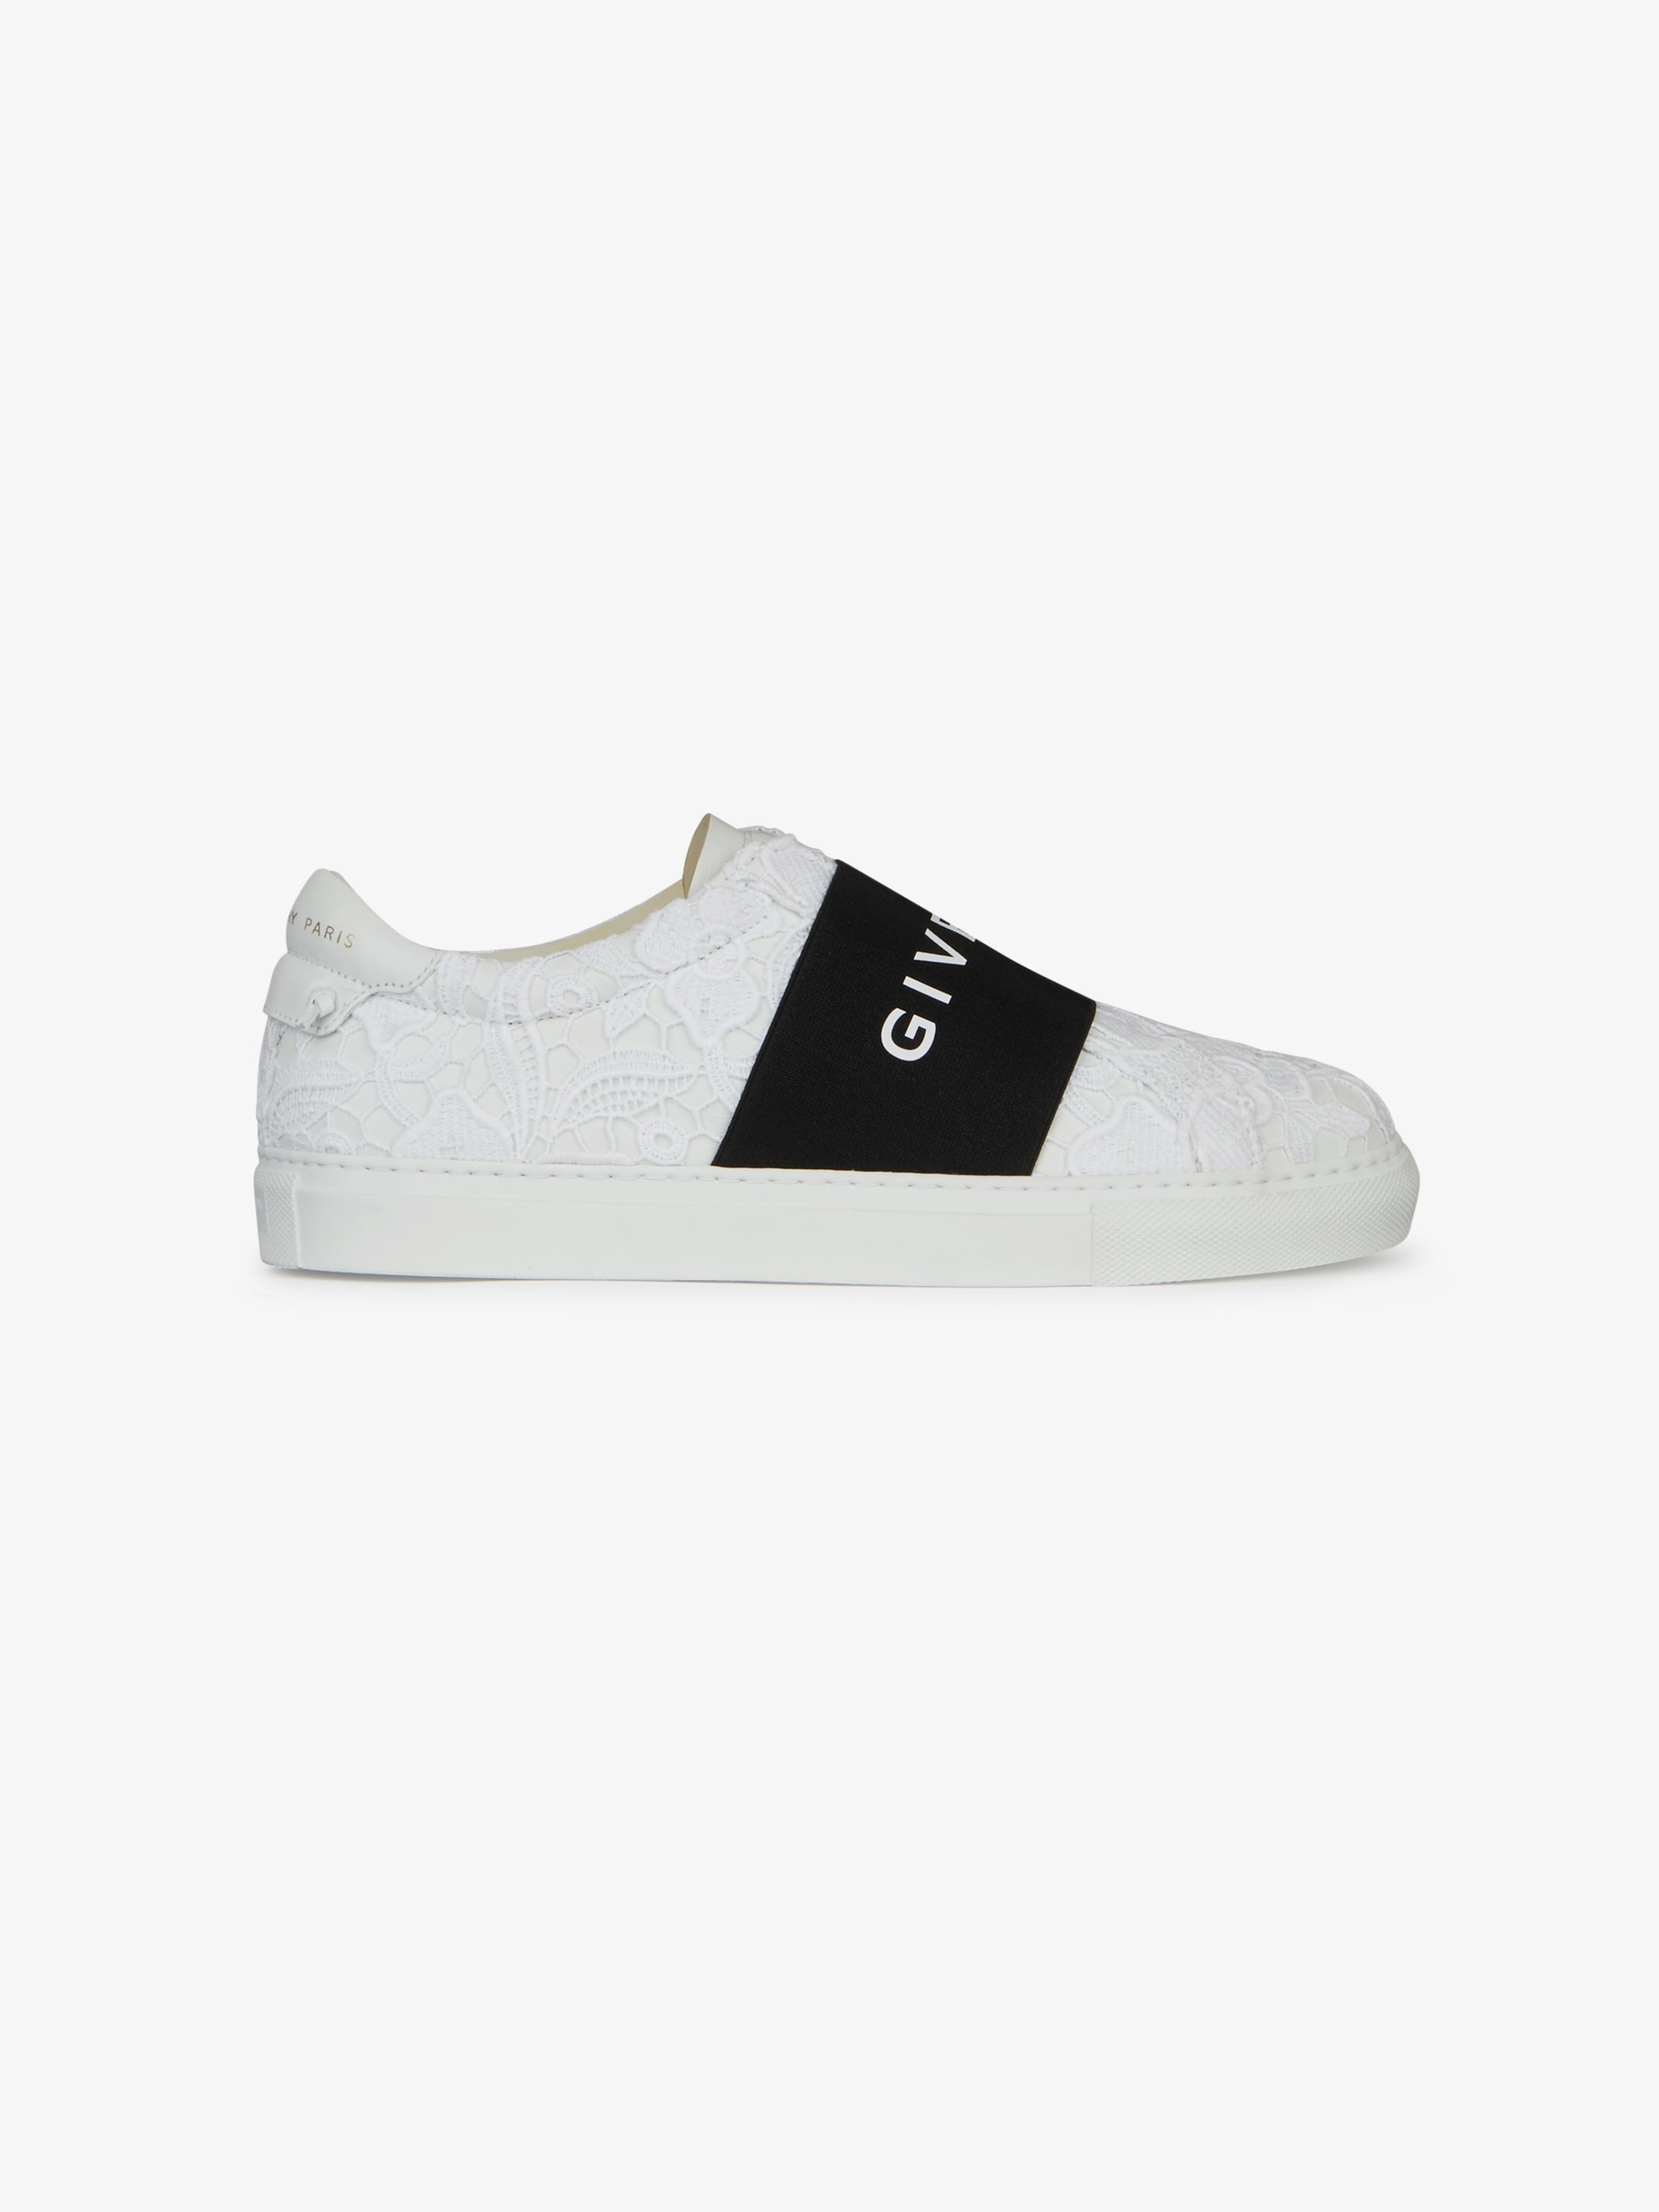 white sneaker with black band